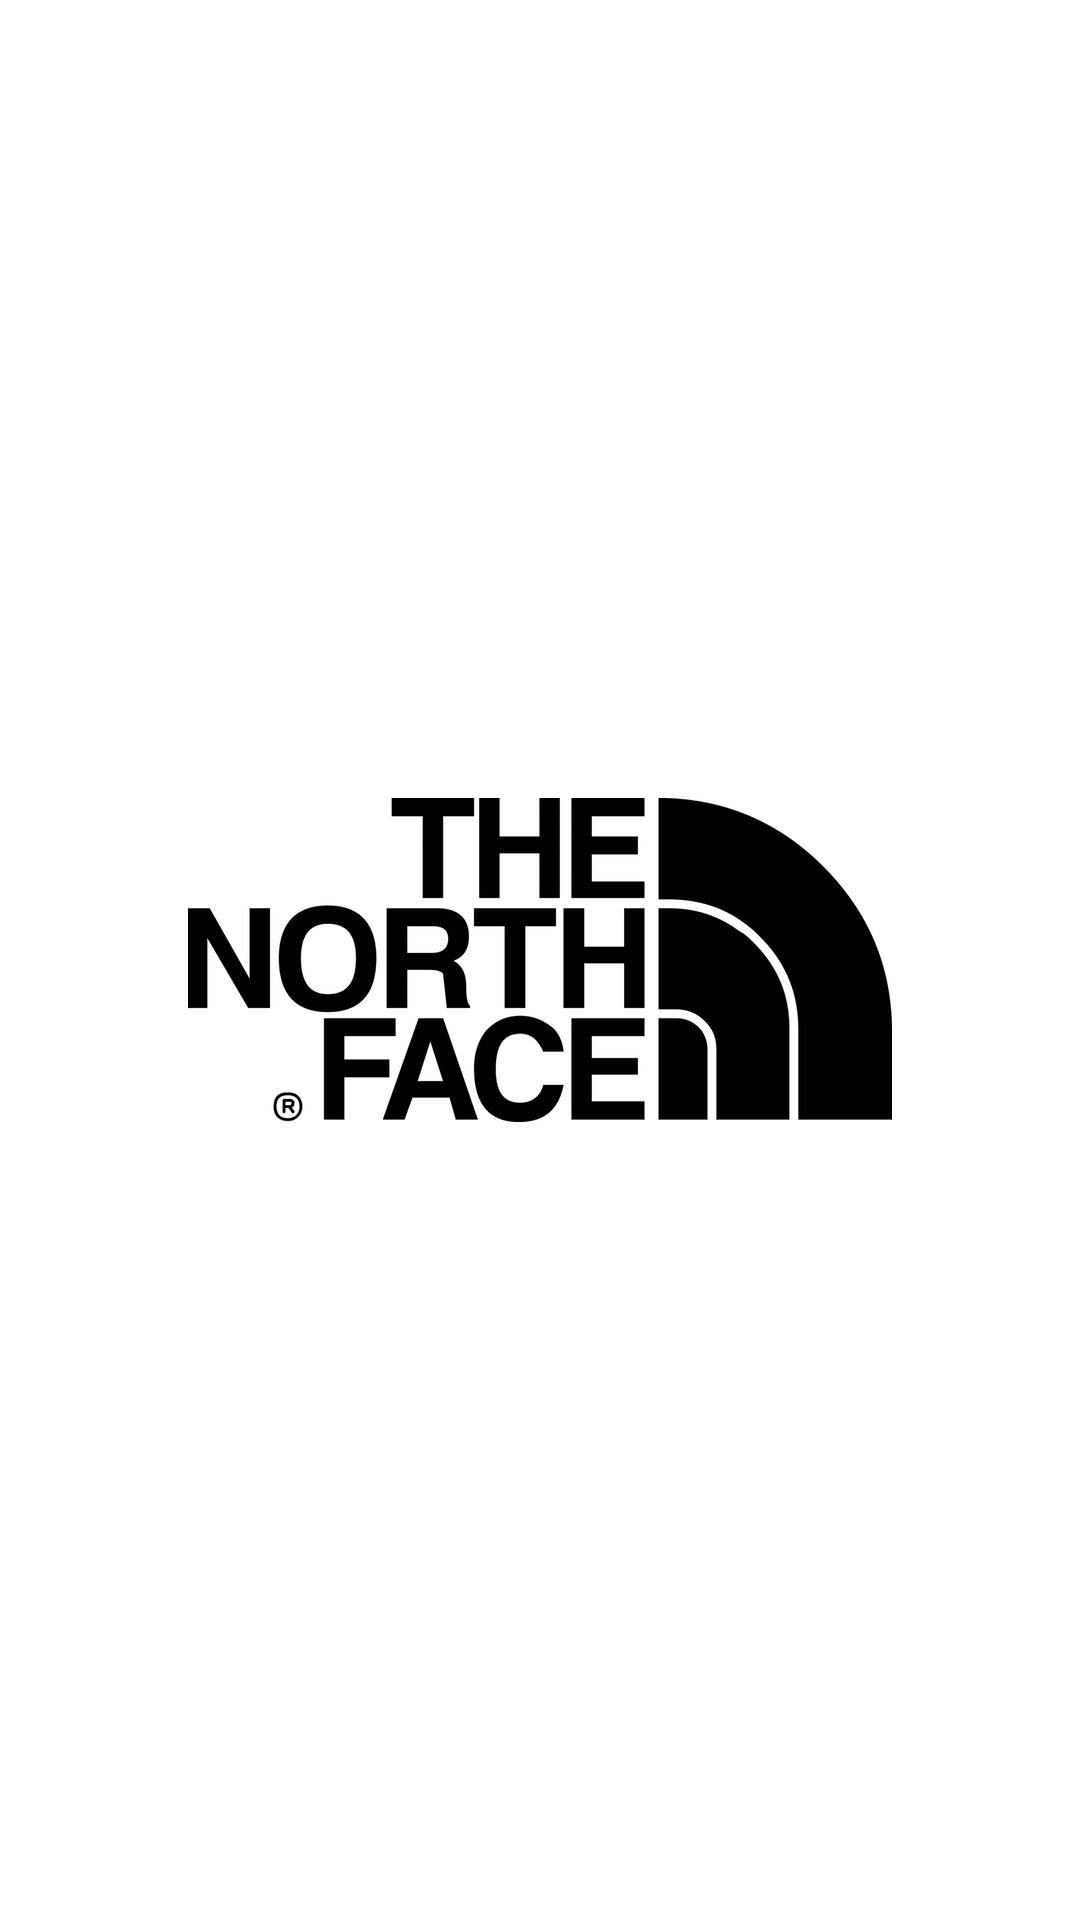 The North Face iPhone Wallpaper Design